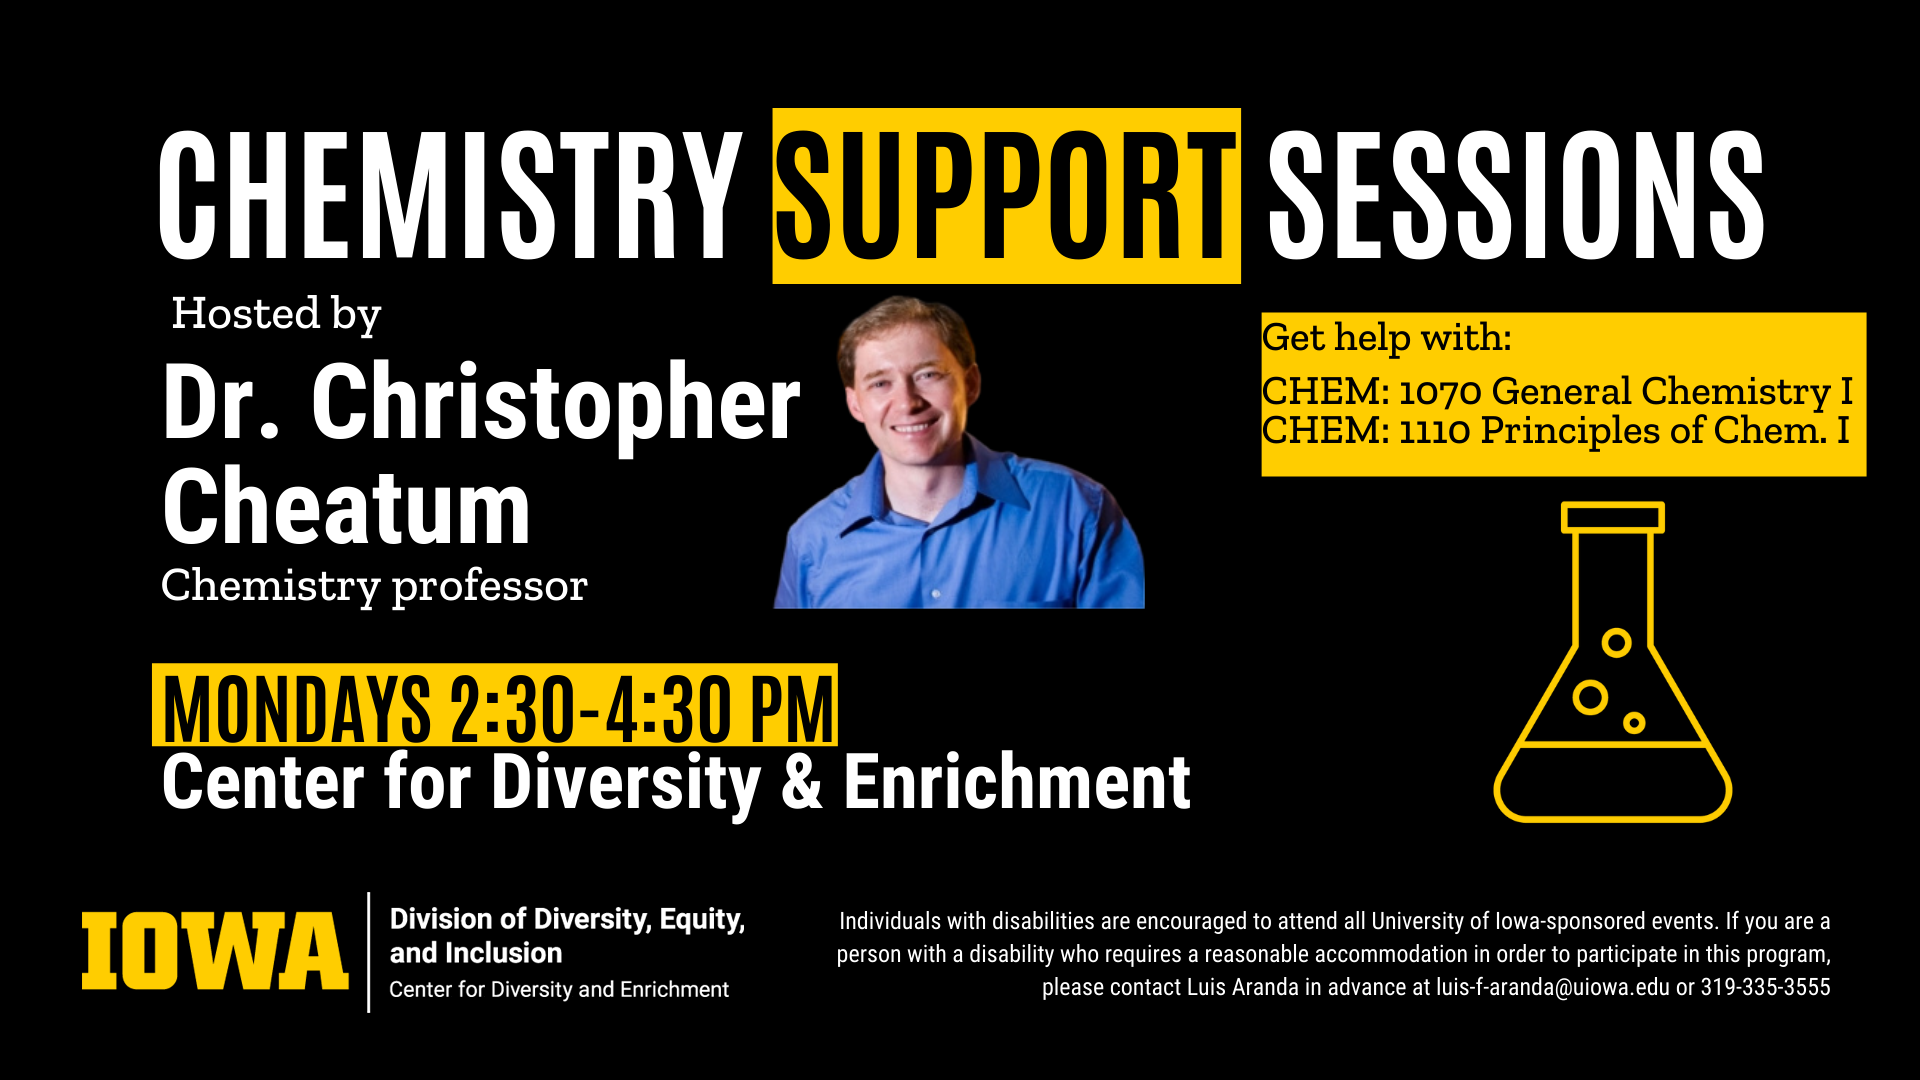 An ad for Chemistry Support Sessions hosted by Dr. Christopher Cheatum, Chemistry Professor. Reads as follows: "Get help with: CHEM: 1070 General Chemistry I, CHEM 1110 Principles of Chem I. Mondays, 2:30 - 4:30 PM, Center for Diversity & Enrichment. Individuals with disabilities are encouraged to attend all University of Iowa-sponsored events. If you are a person with a disability who requires a reasonable accommodation in order to participate in this program, please contact Luis Aranda in advance at luis-f-aranda@uiowa.edu or 319-335-3555.